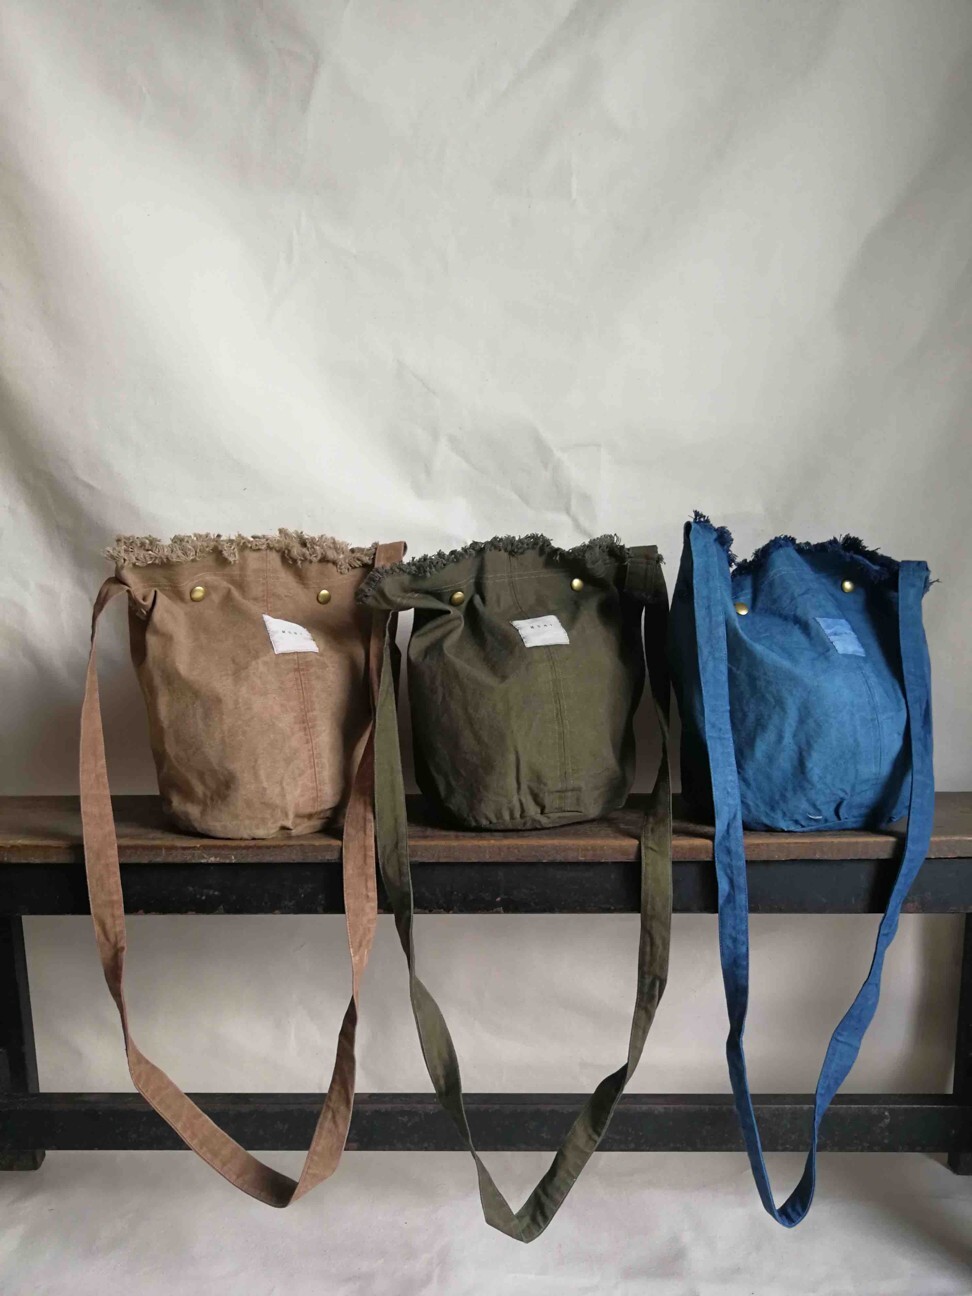 Bags coloured with natural dyes from Munimalism.